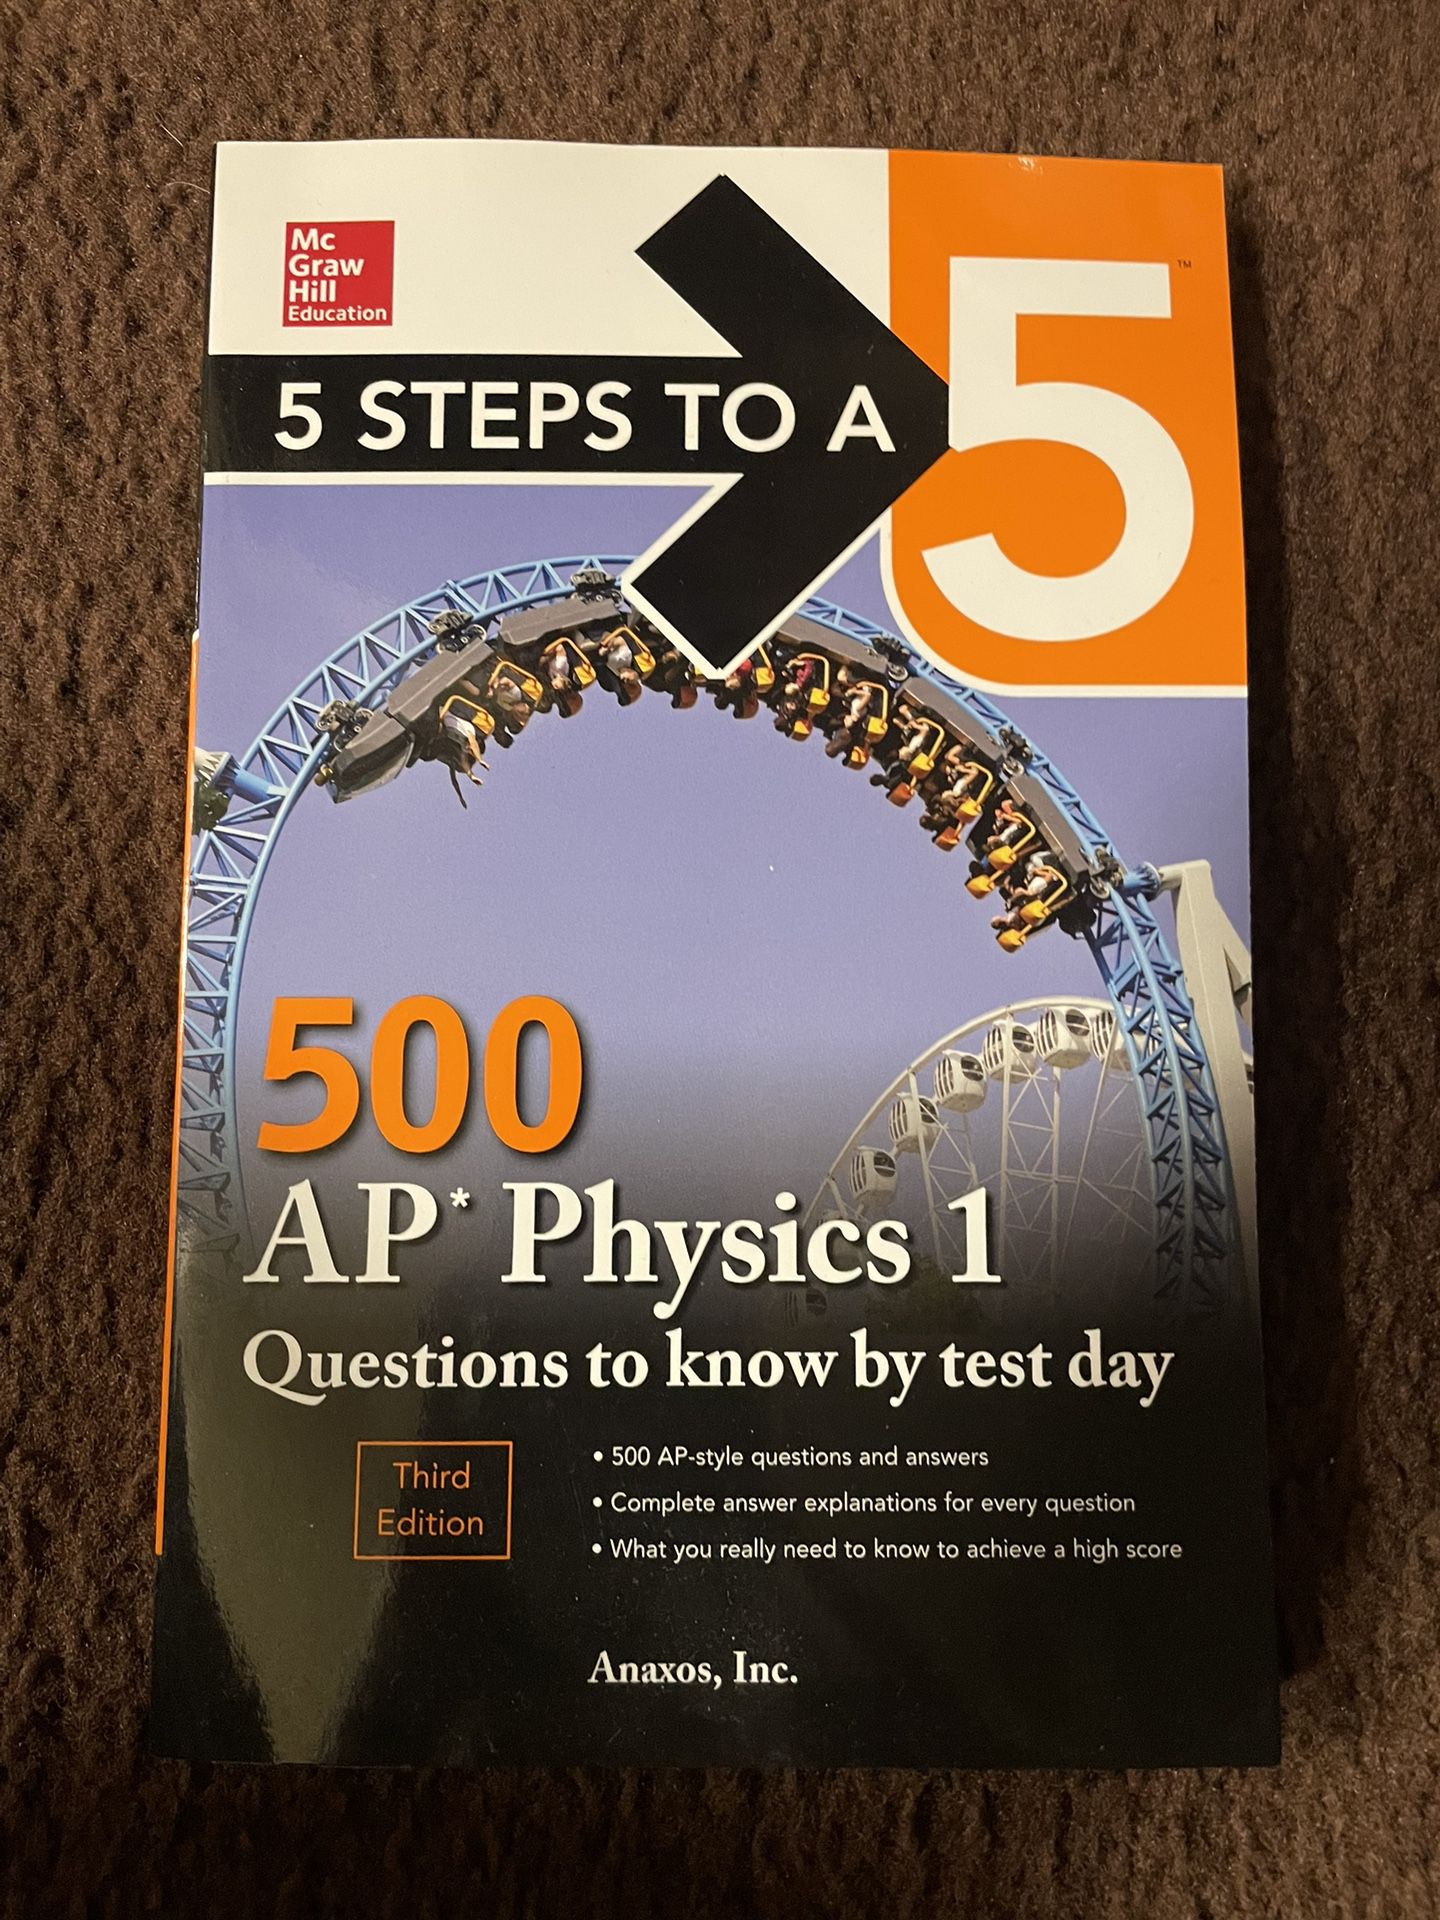 5 Steps To A 5 500 AP Physics Questions 